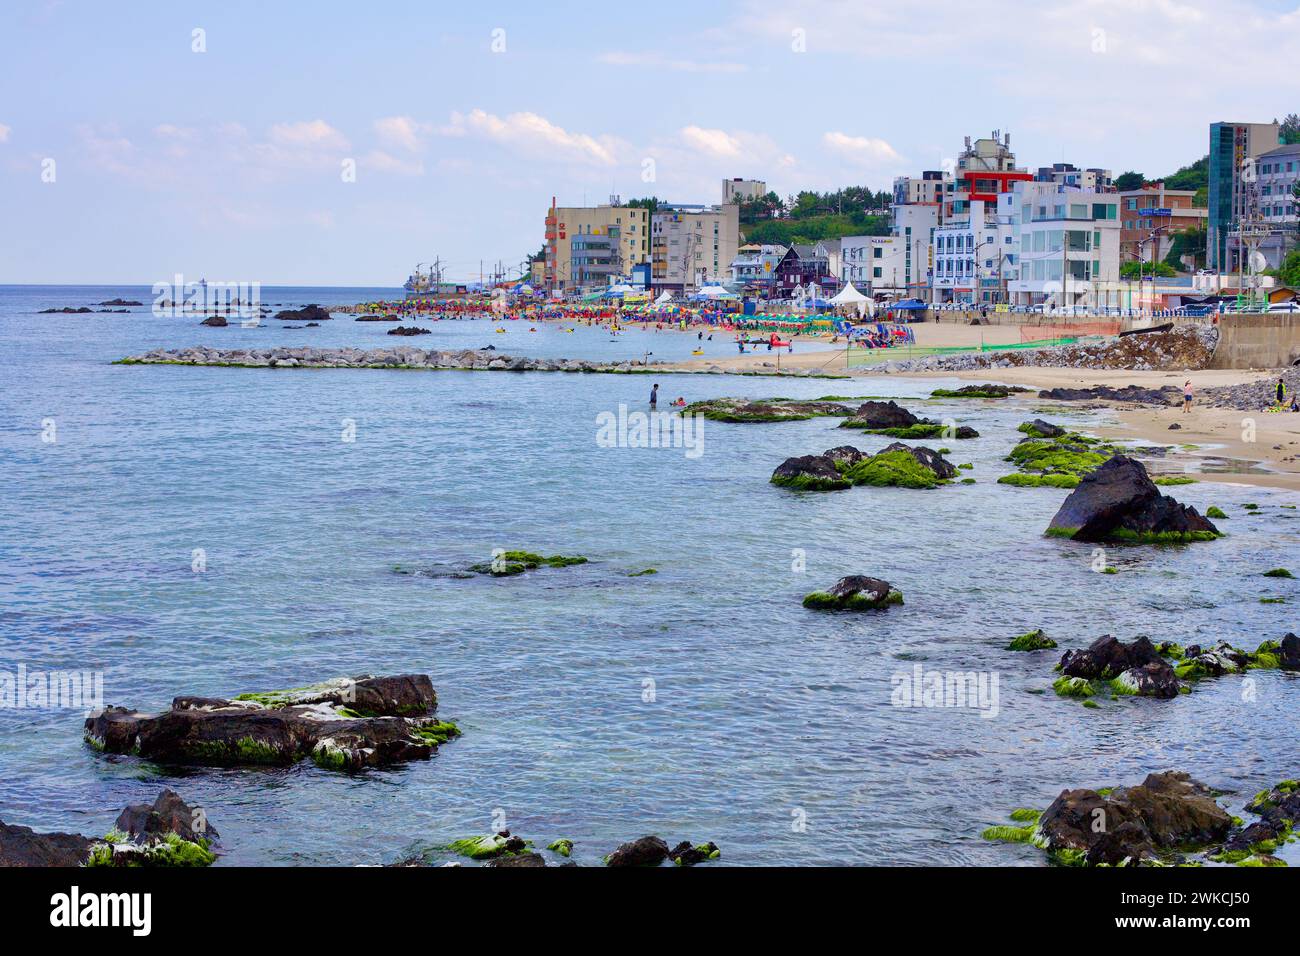 Donghae City, South Korea - July 28th, 2019: Overlooking Eodal Port and Beach, where rocks guard the sandy shores, people enjoy the water shielded by Stock Photo